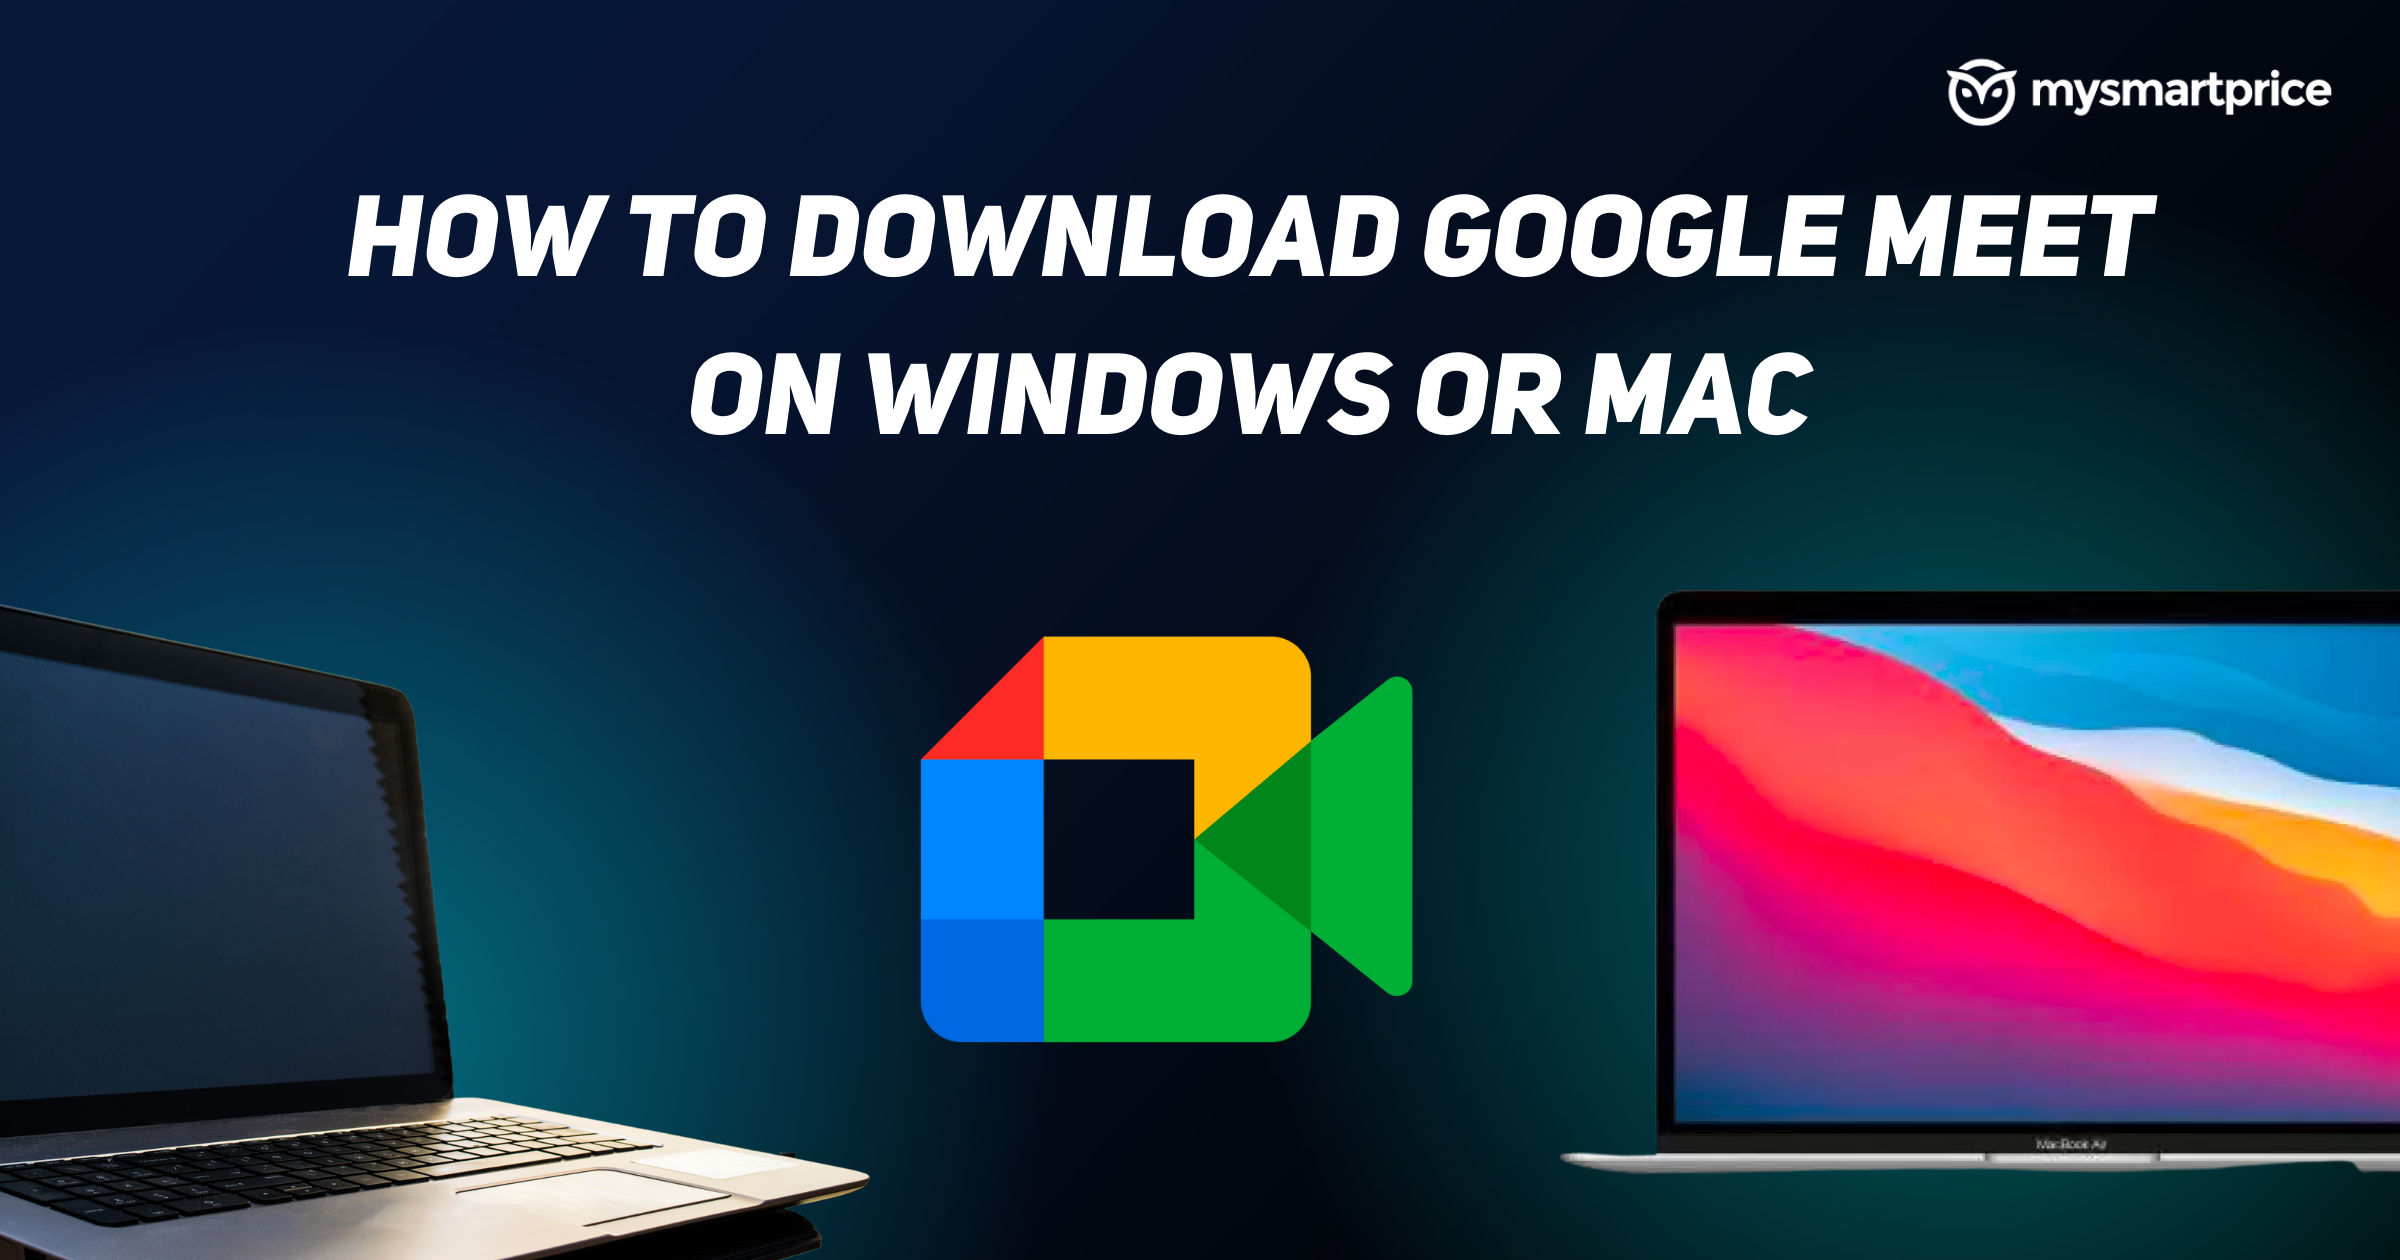 how to download google images to mac